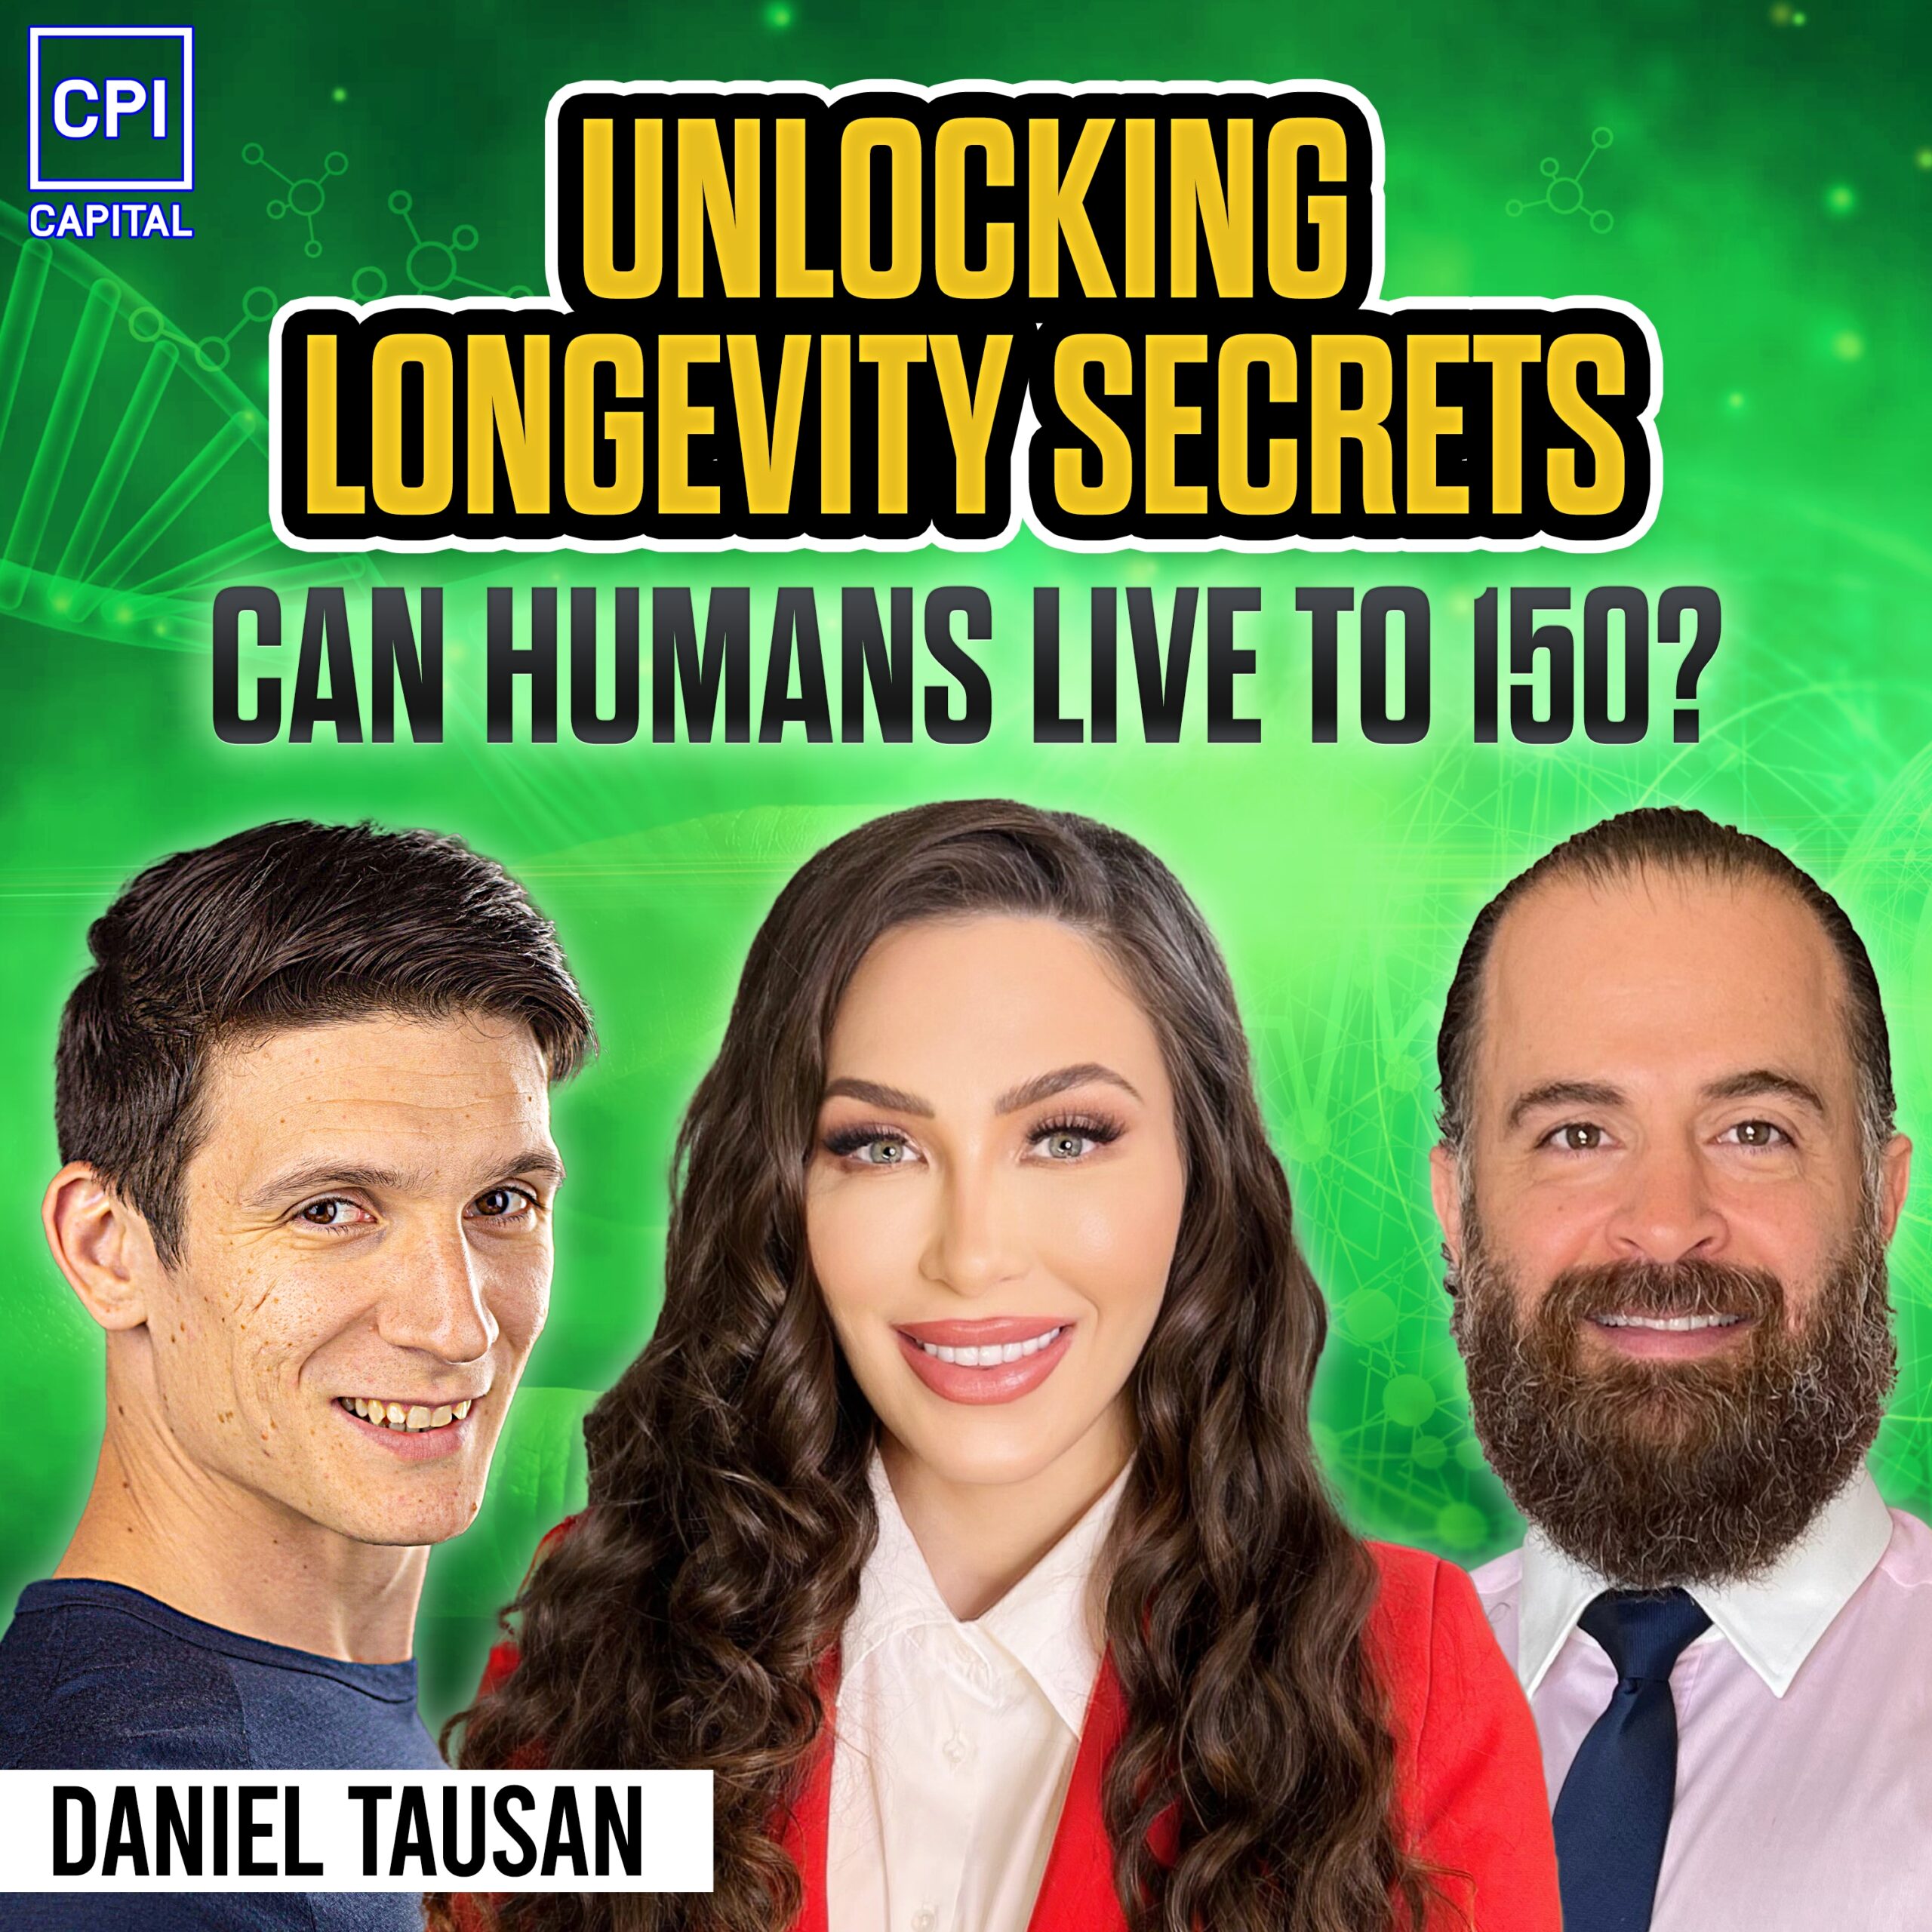 Unlocking Longevity Secrets With Scientist Daniel Tausan: Can Humans Live To 150? Discovering Health Truths Beyond The Pharma Curtain